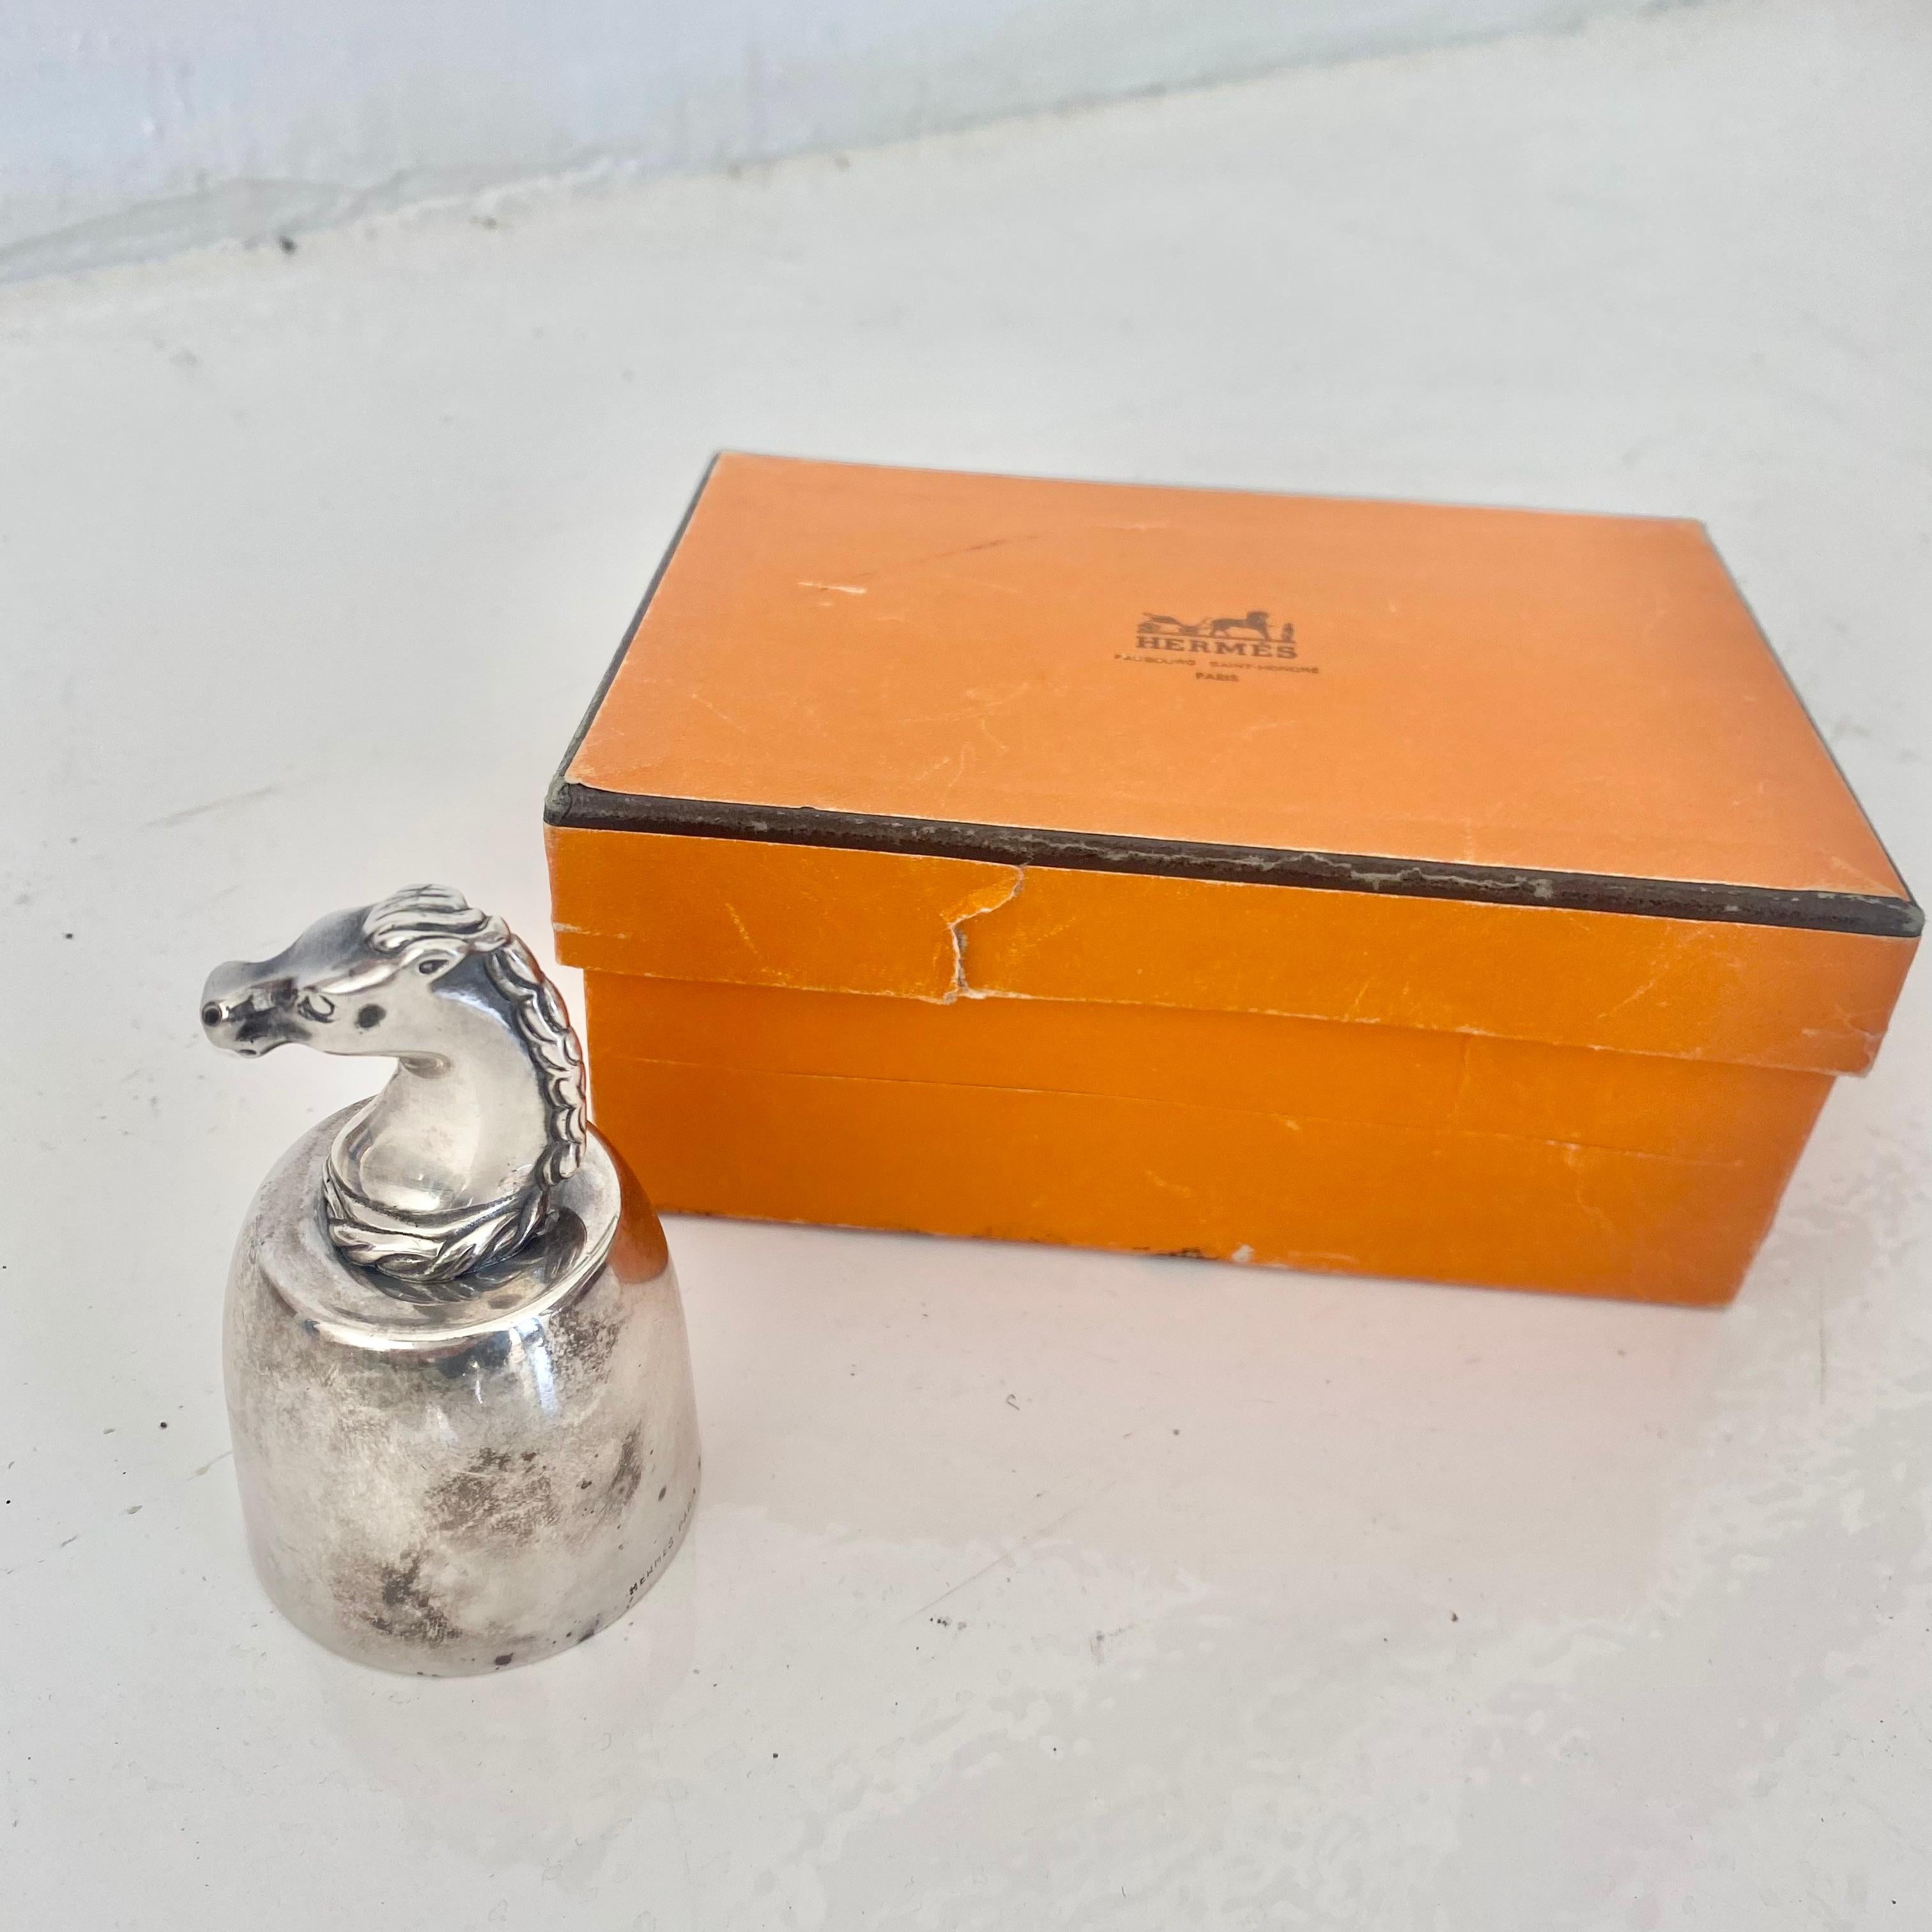 Beautiful vintage Hermès equestrian bell. Hermès Paris and made in France stamped on outer rim. Beautiful accent piece to elevate any nightstand, desk or side table. Great piece of collectible Hermes. Comes with original box and wrapping.